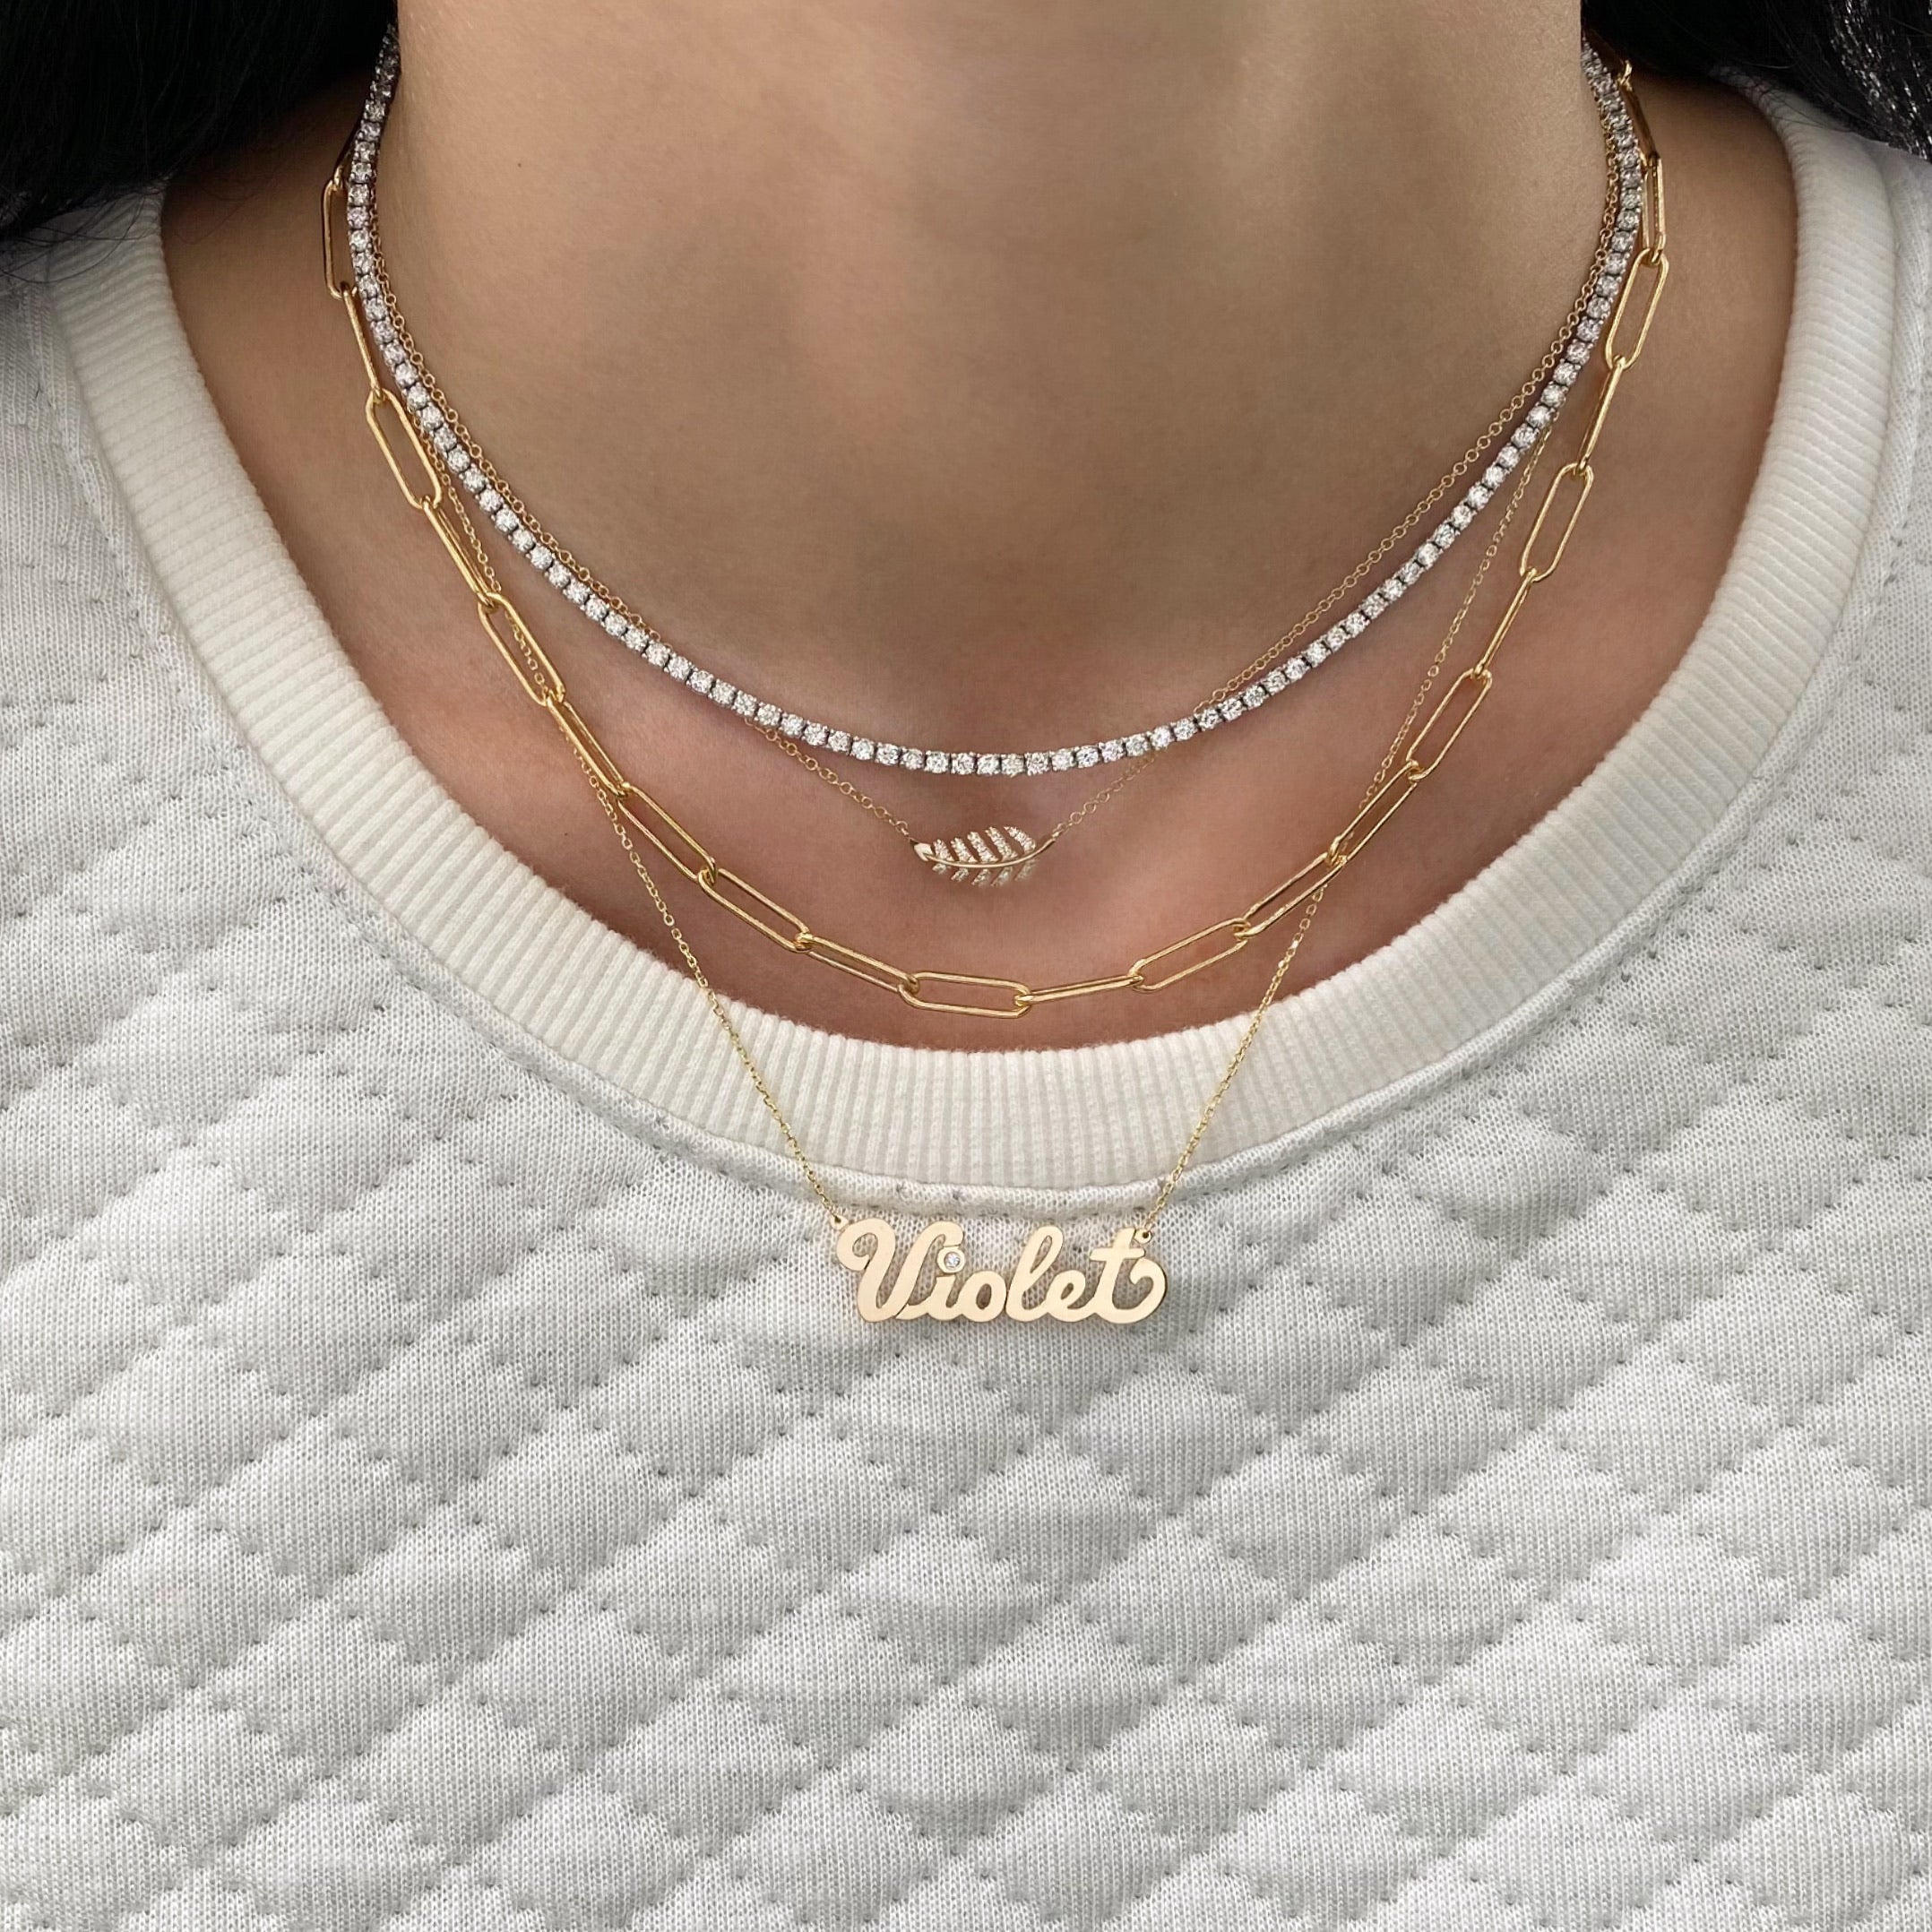 Large Script Name Necklace With Diamond Accent